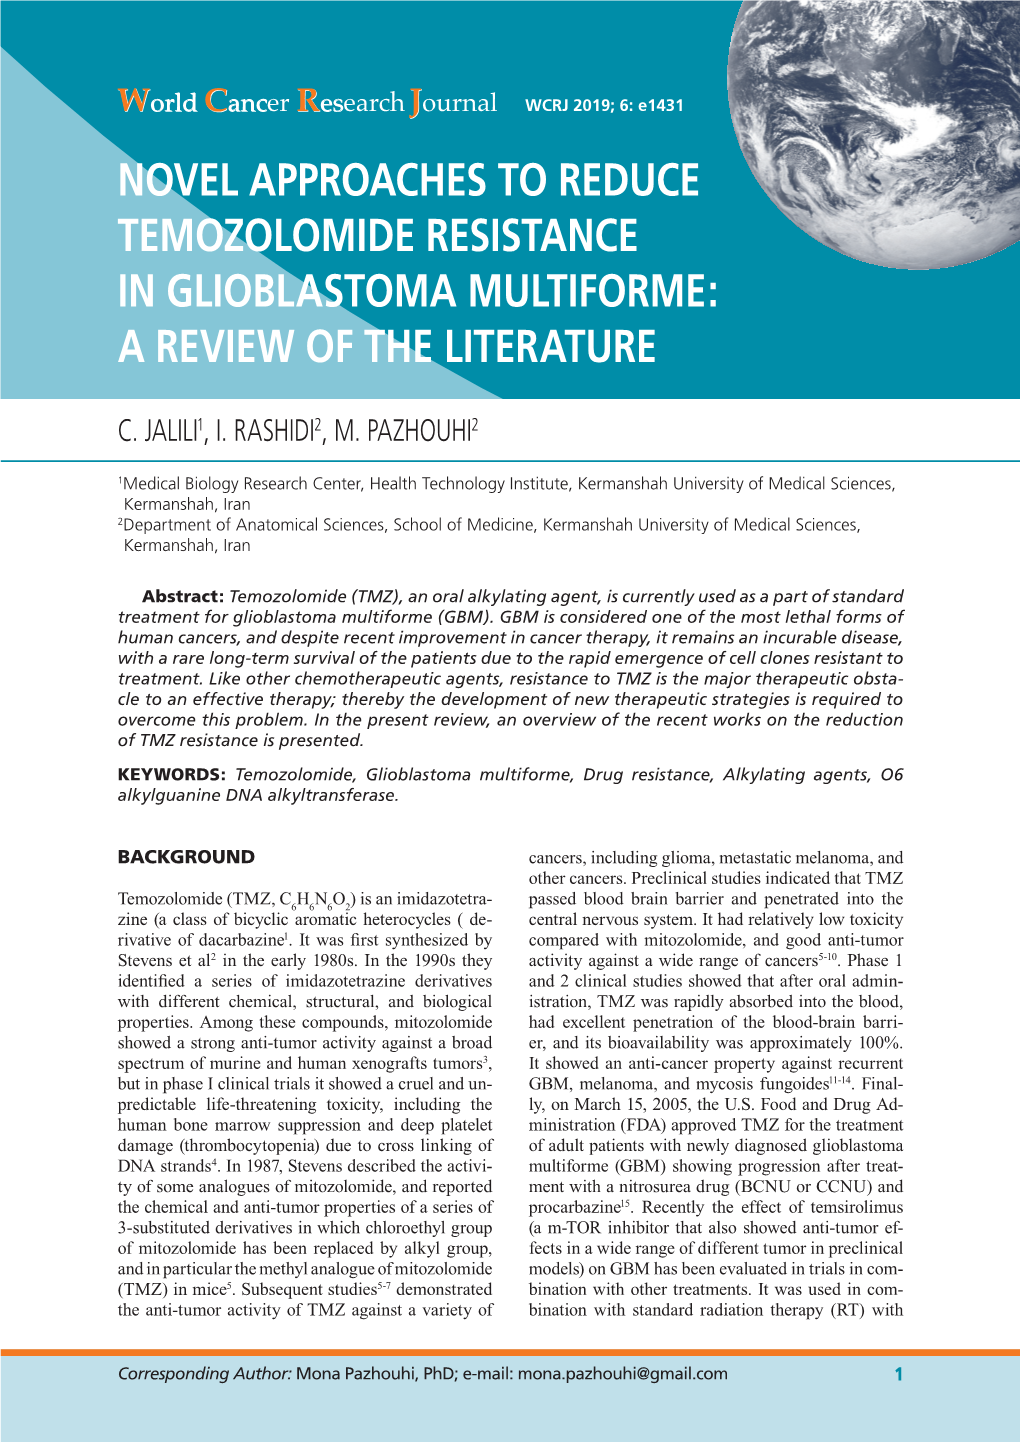 Novel Approaches to Reduce Temozolomide Resistance in Glioblastoma Multiforme: a Review of the Literature